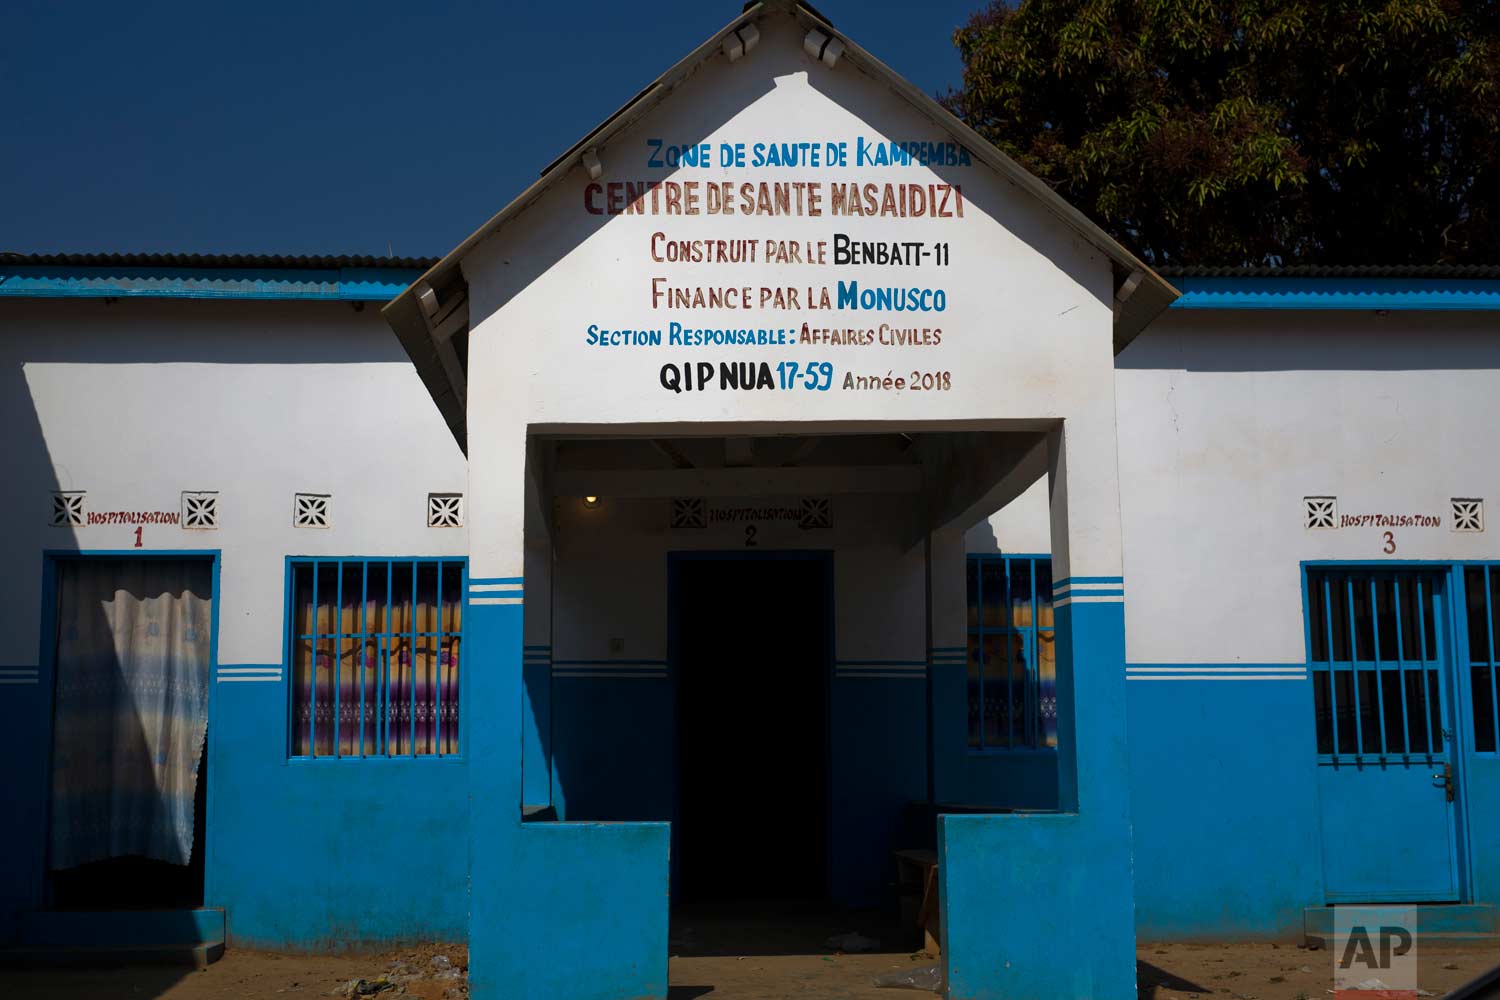  This Tuesday, Aug. 14, 2018 photo shows the entrance of the Masaidizi Health Center, which was recently built by the United Nations in Lubumbashi, Democratic Republic of the Congo. The health compound's four buildings are painted in white and U.N. b